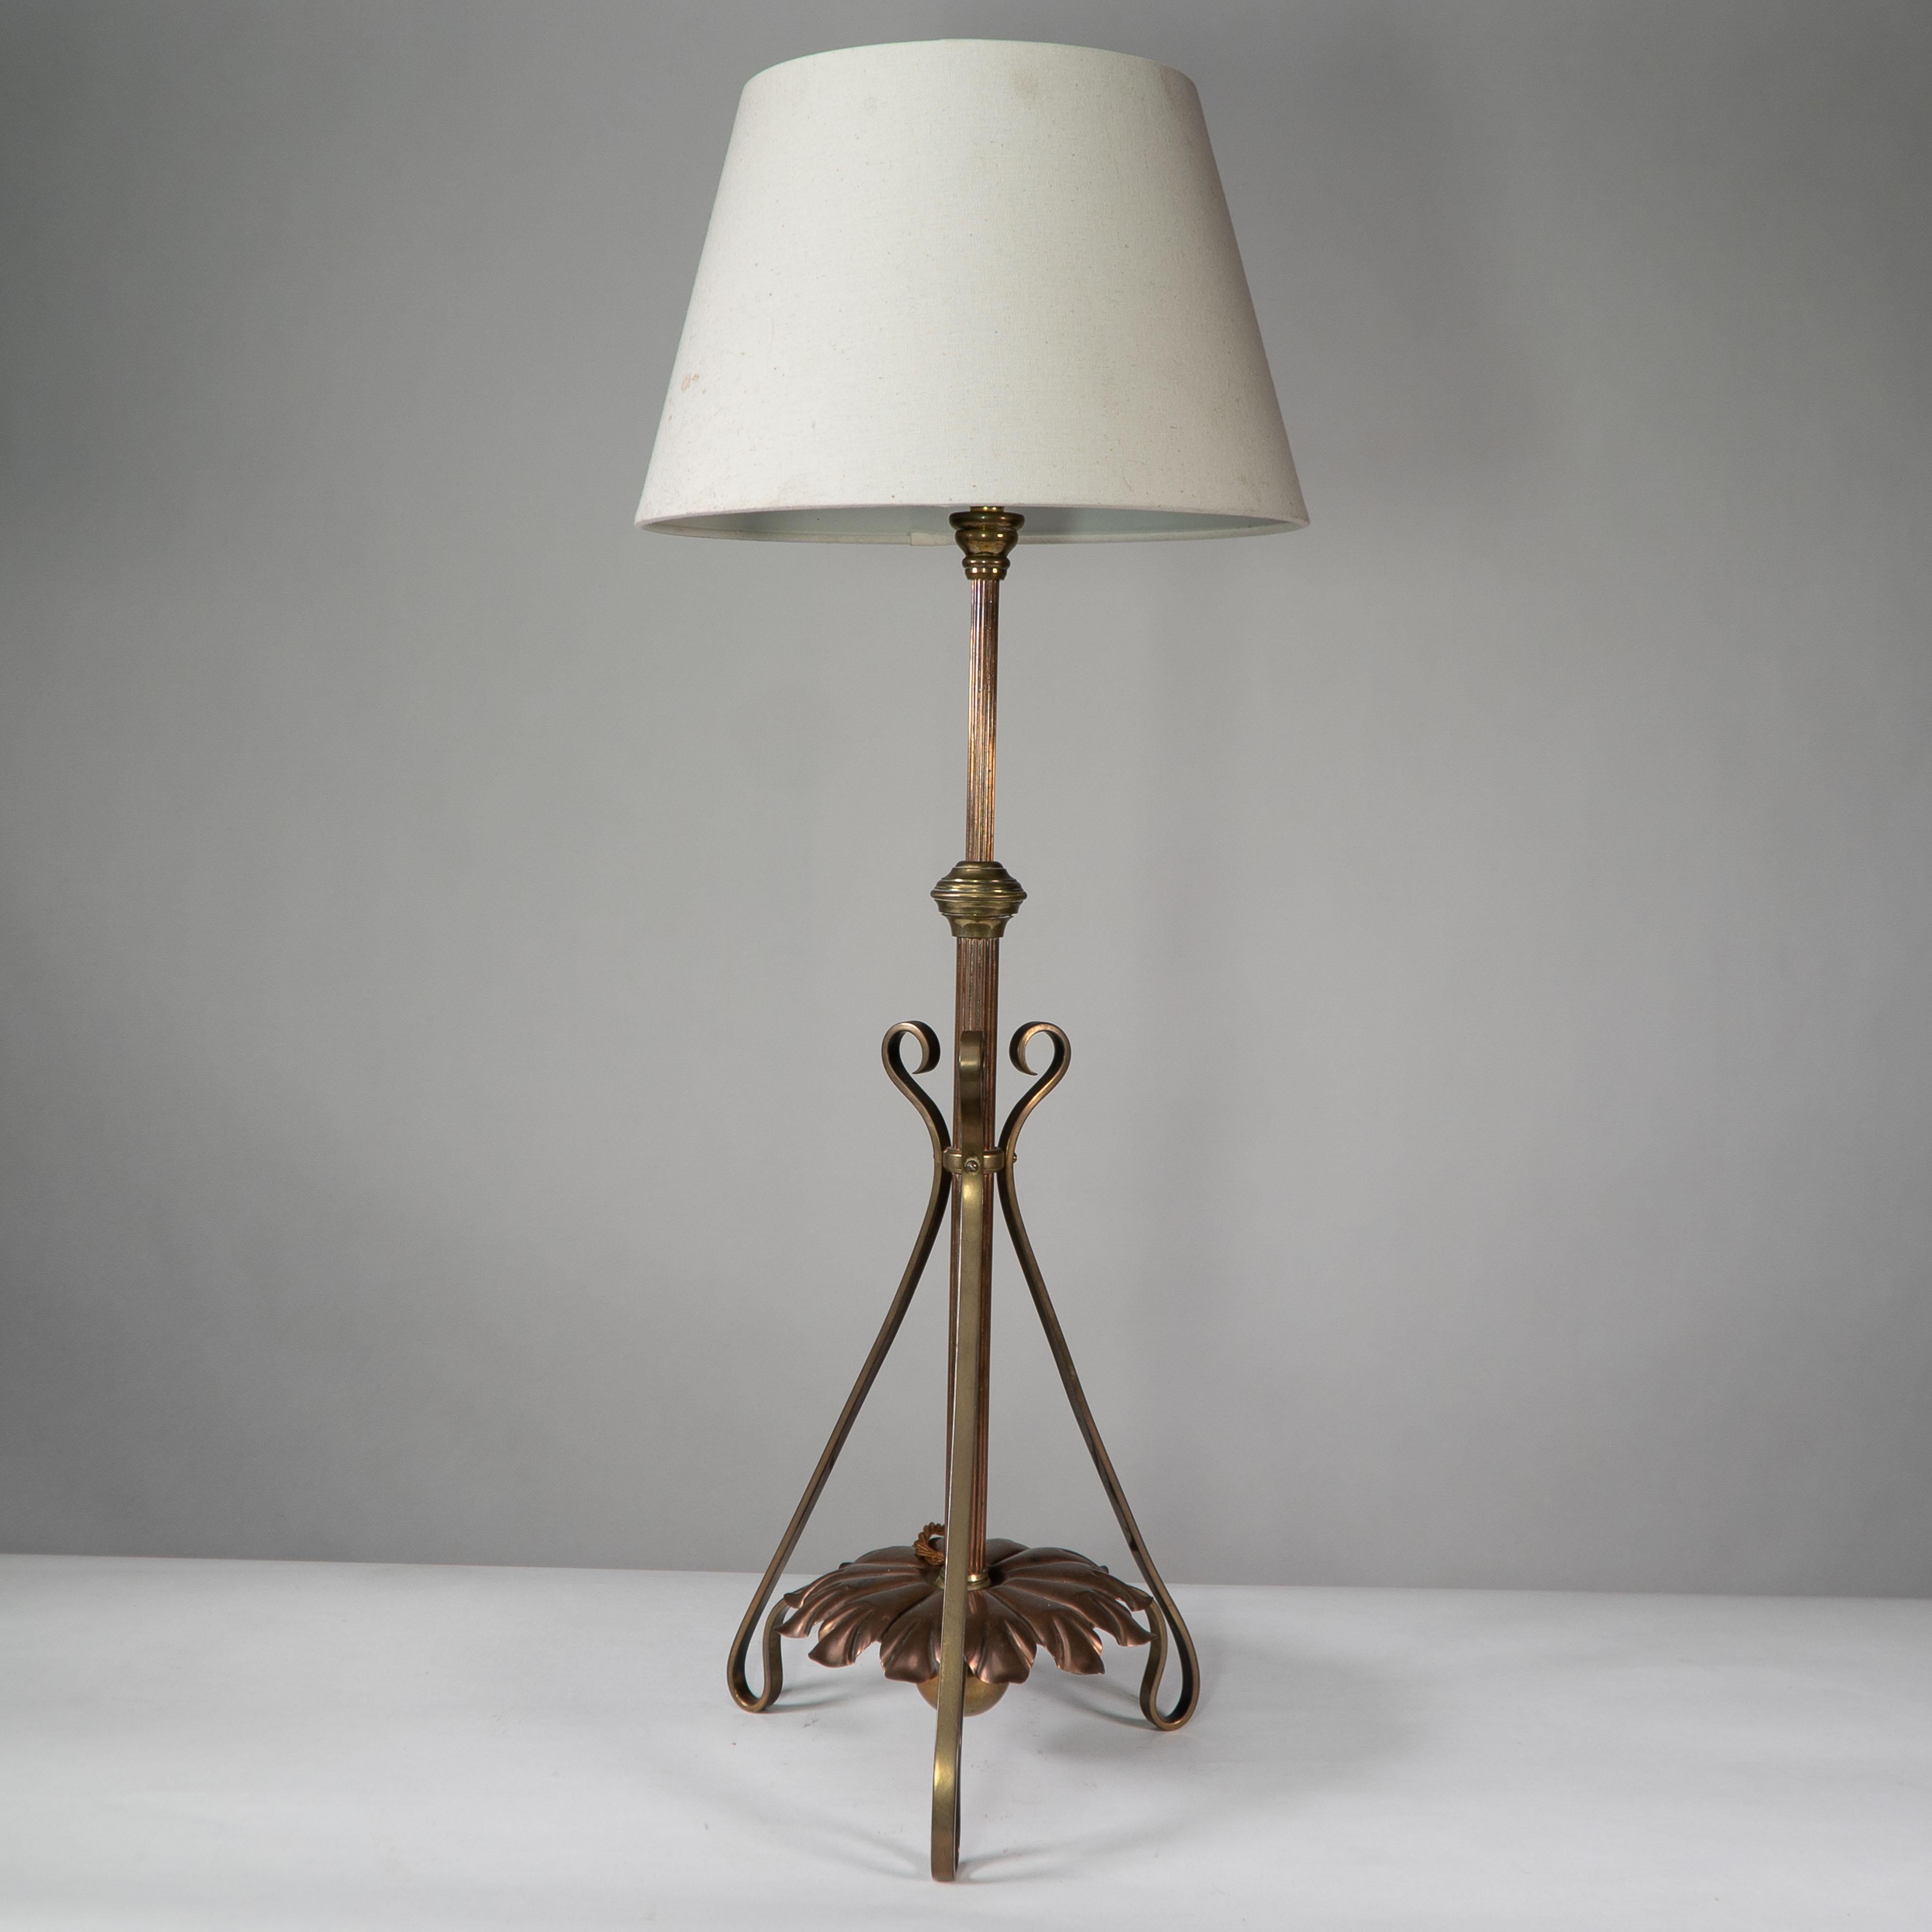 W A S Benson. A rare Arts and Crafts telescopic adjustable copper and brass table lamp. WAS Benson Catalogue number 390.
